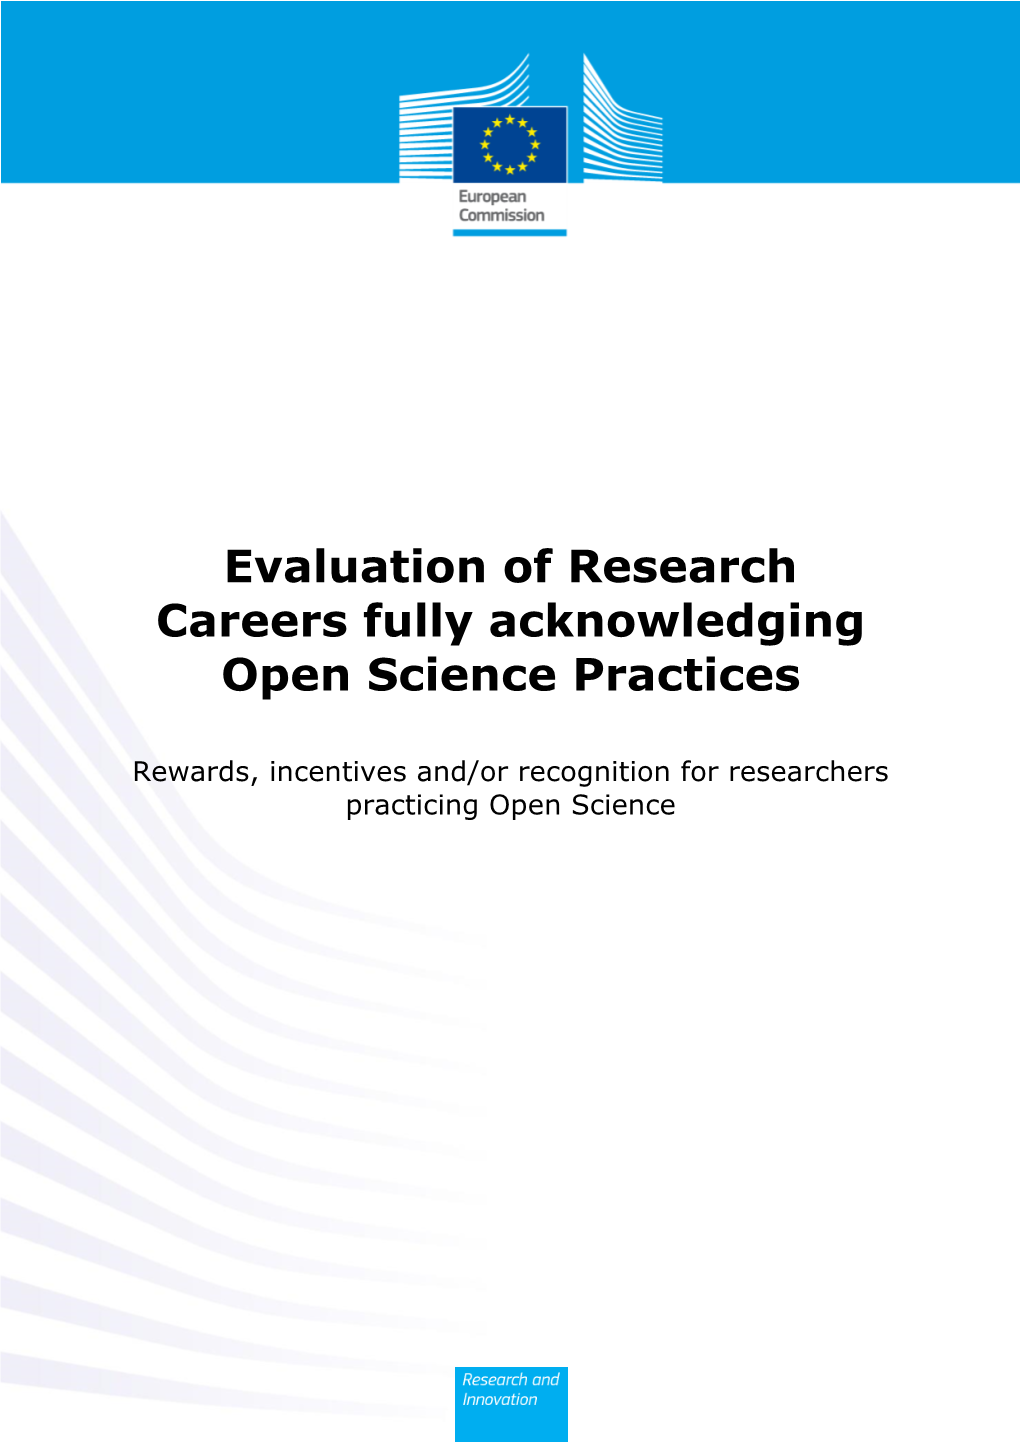 Evaluation of Research Careers Fully Acknowledging Open Science Practices